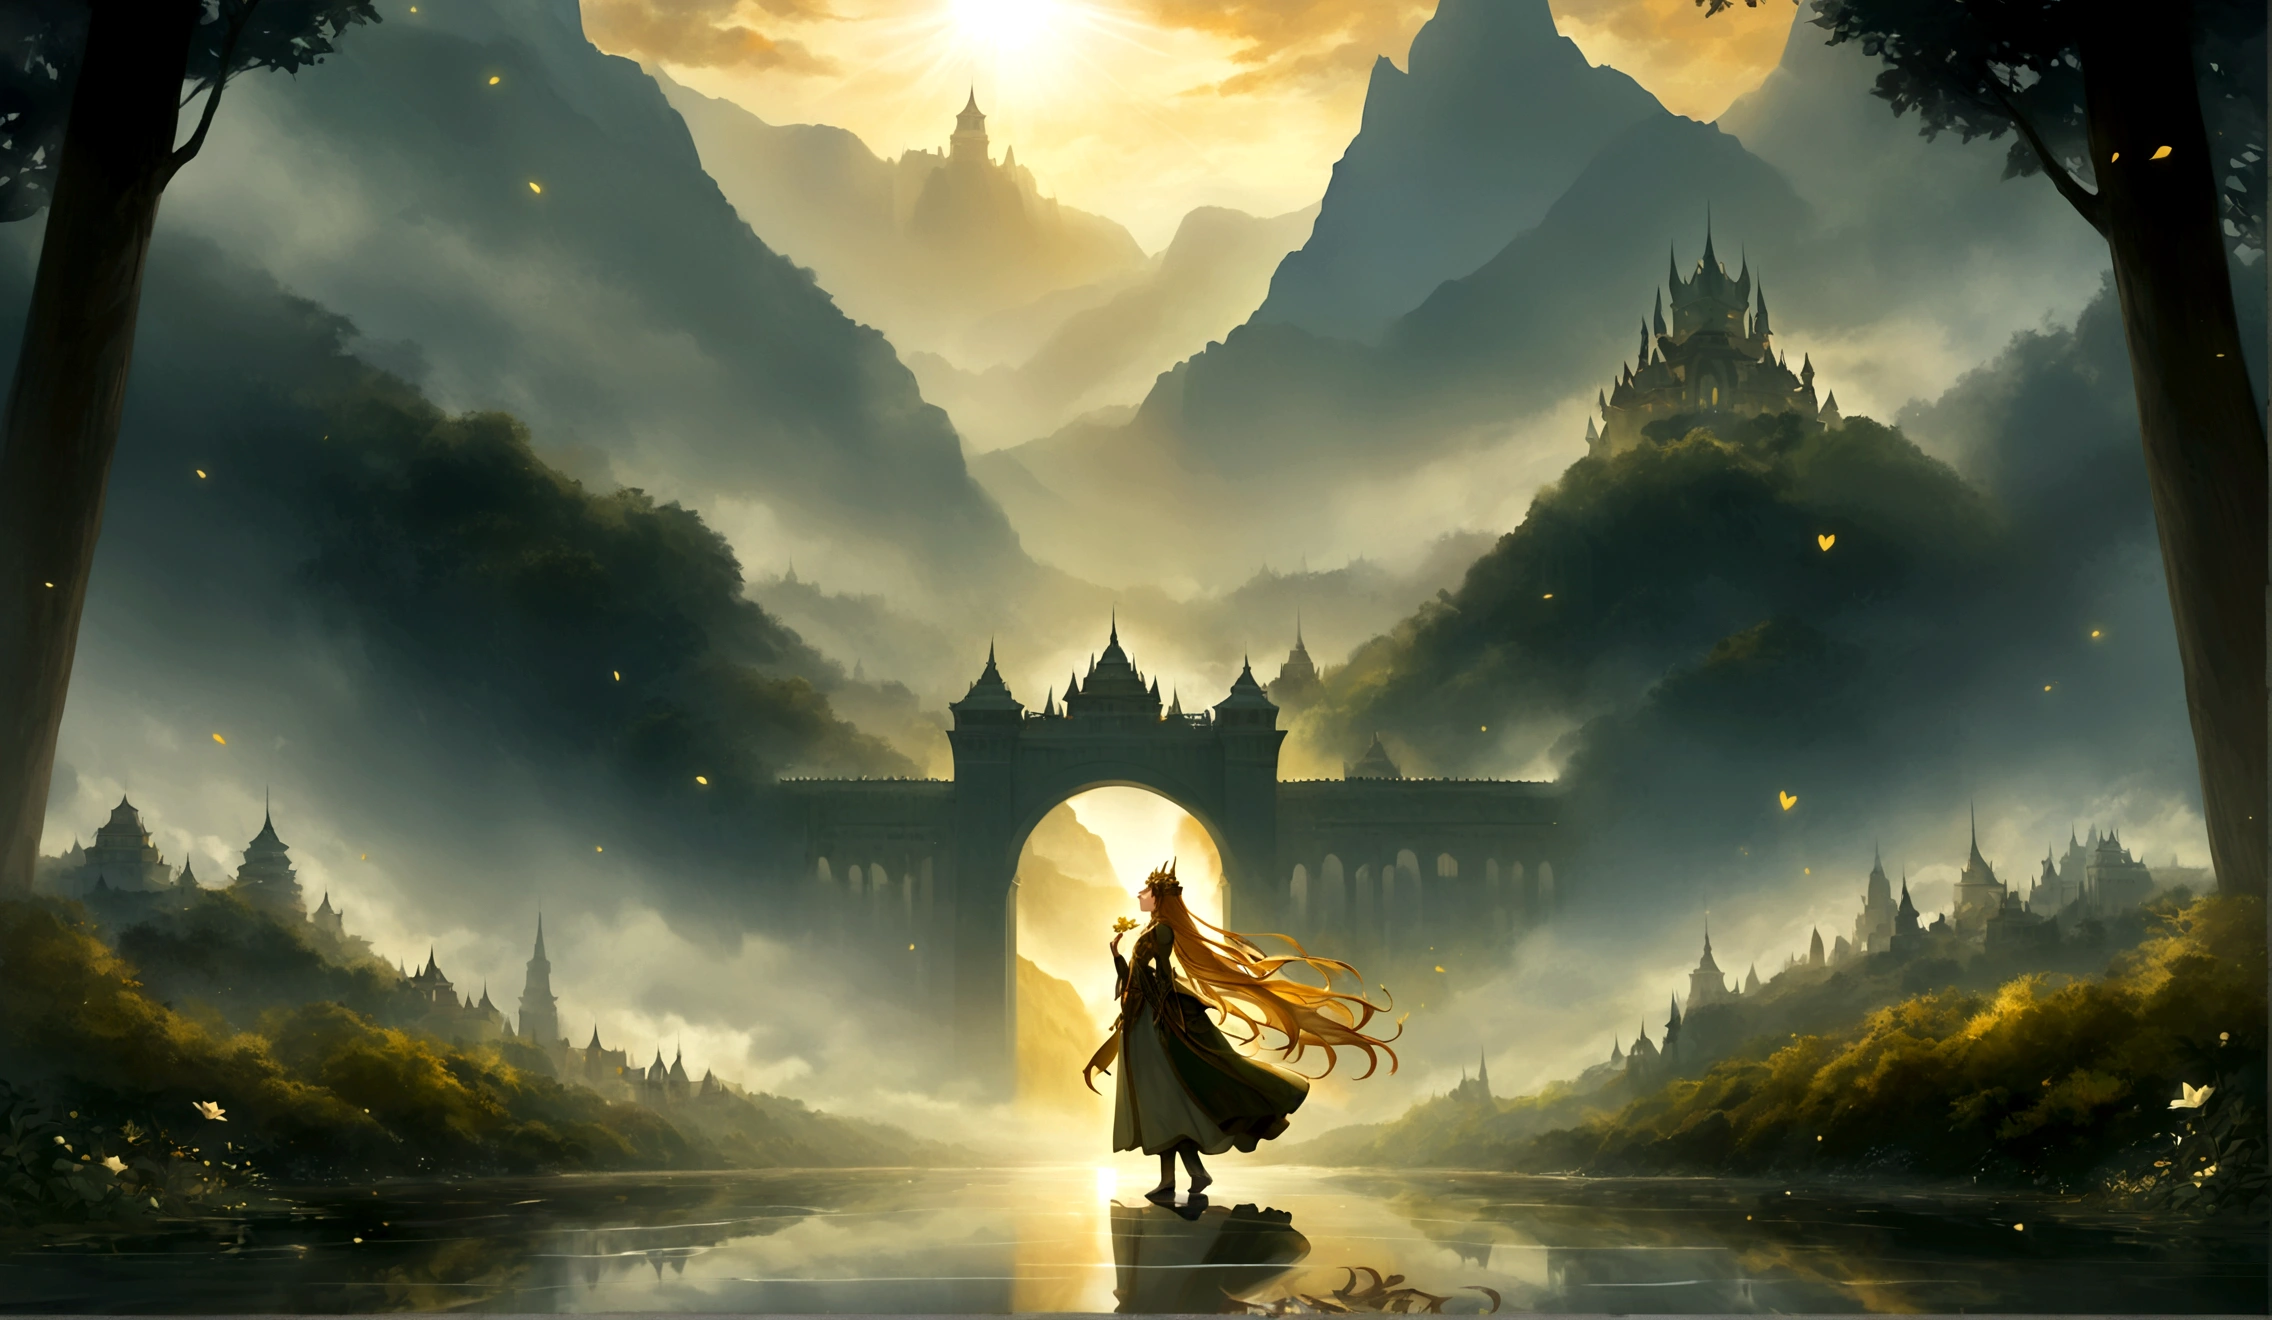 

The scene is set in a fantastical realm where magic and ancient traditions intertwine seamlessly. Majestic mountains loom in the distance, their peaks shrouded in mist, hinting at the mysteries they conceal. A serene river meanders through the lush, verdant landscape, its waters sparkling under the golden rays of a setting sun. On one bank stands a grand palace with towering spires, its architecture a blend of elegance and grandeur, reflecting the opulence of a bygone era.

In the foreground, a dense forest teems with life, the trees towering and ancient, their leaves whispering secrets of old. The air is filled with the scent of blooming flowers and the distant calls of mythical creatures. At the heart of this enchanting world stands a solitary figure, their presence commanding and aura imbued with a sense of pride and arrogance inherited from an ancient legacy. The scene is both serene and charged with an underlying tension, a perfect blend of beauty and latent power.